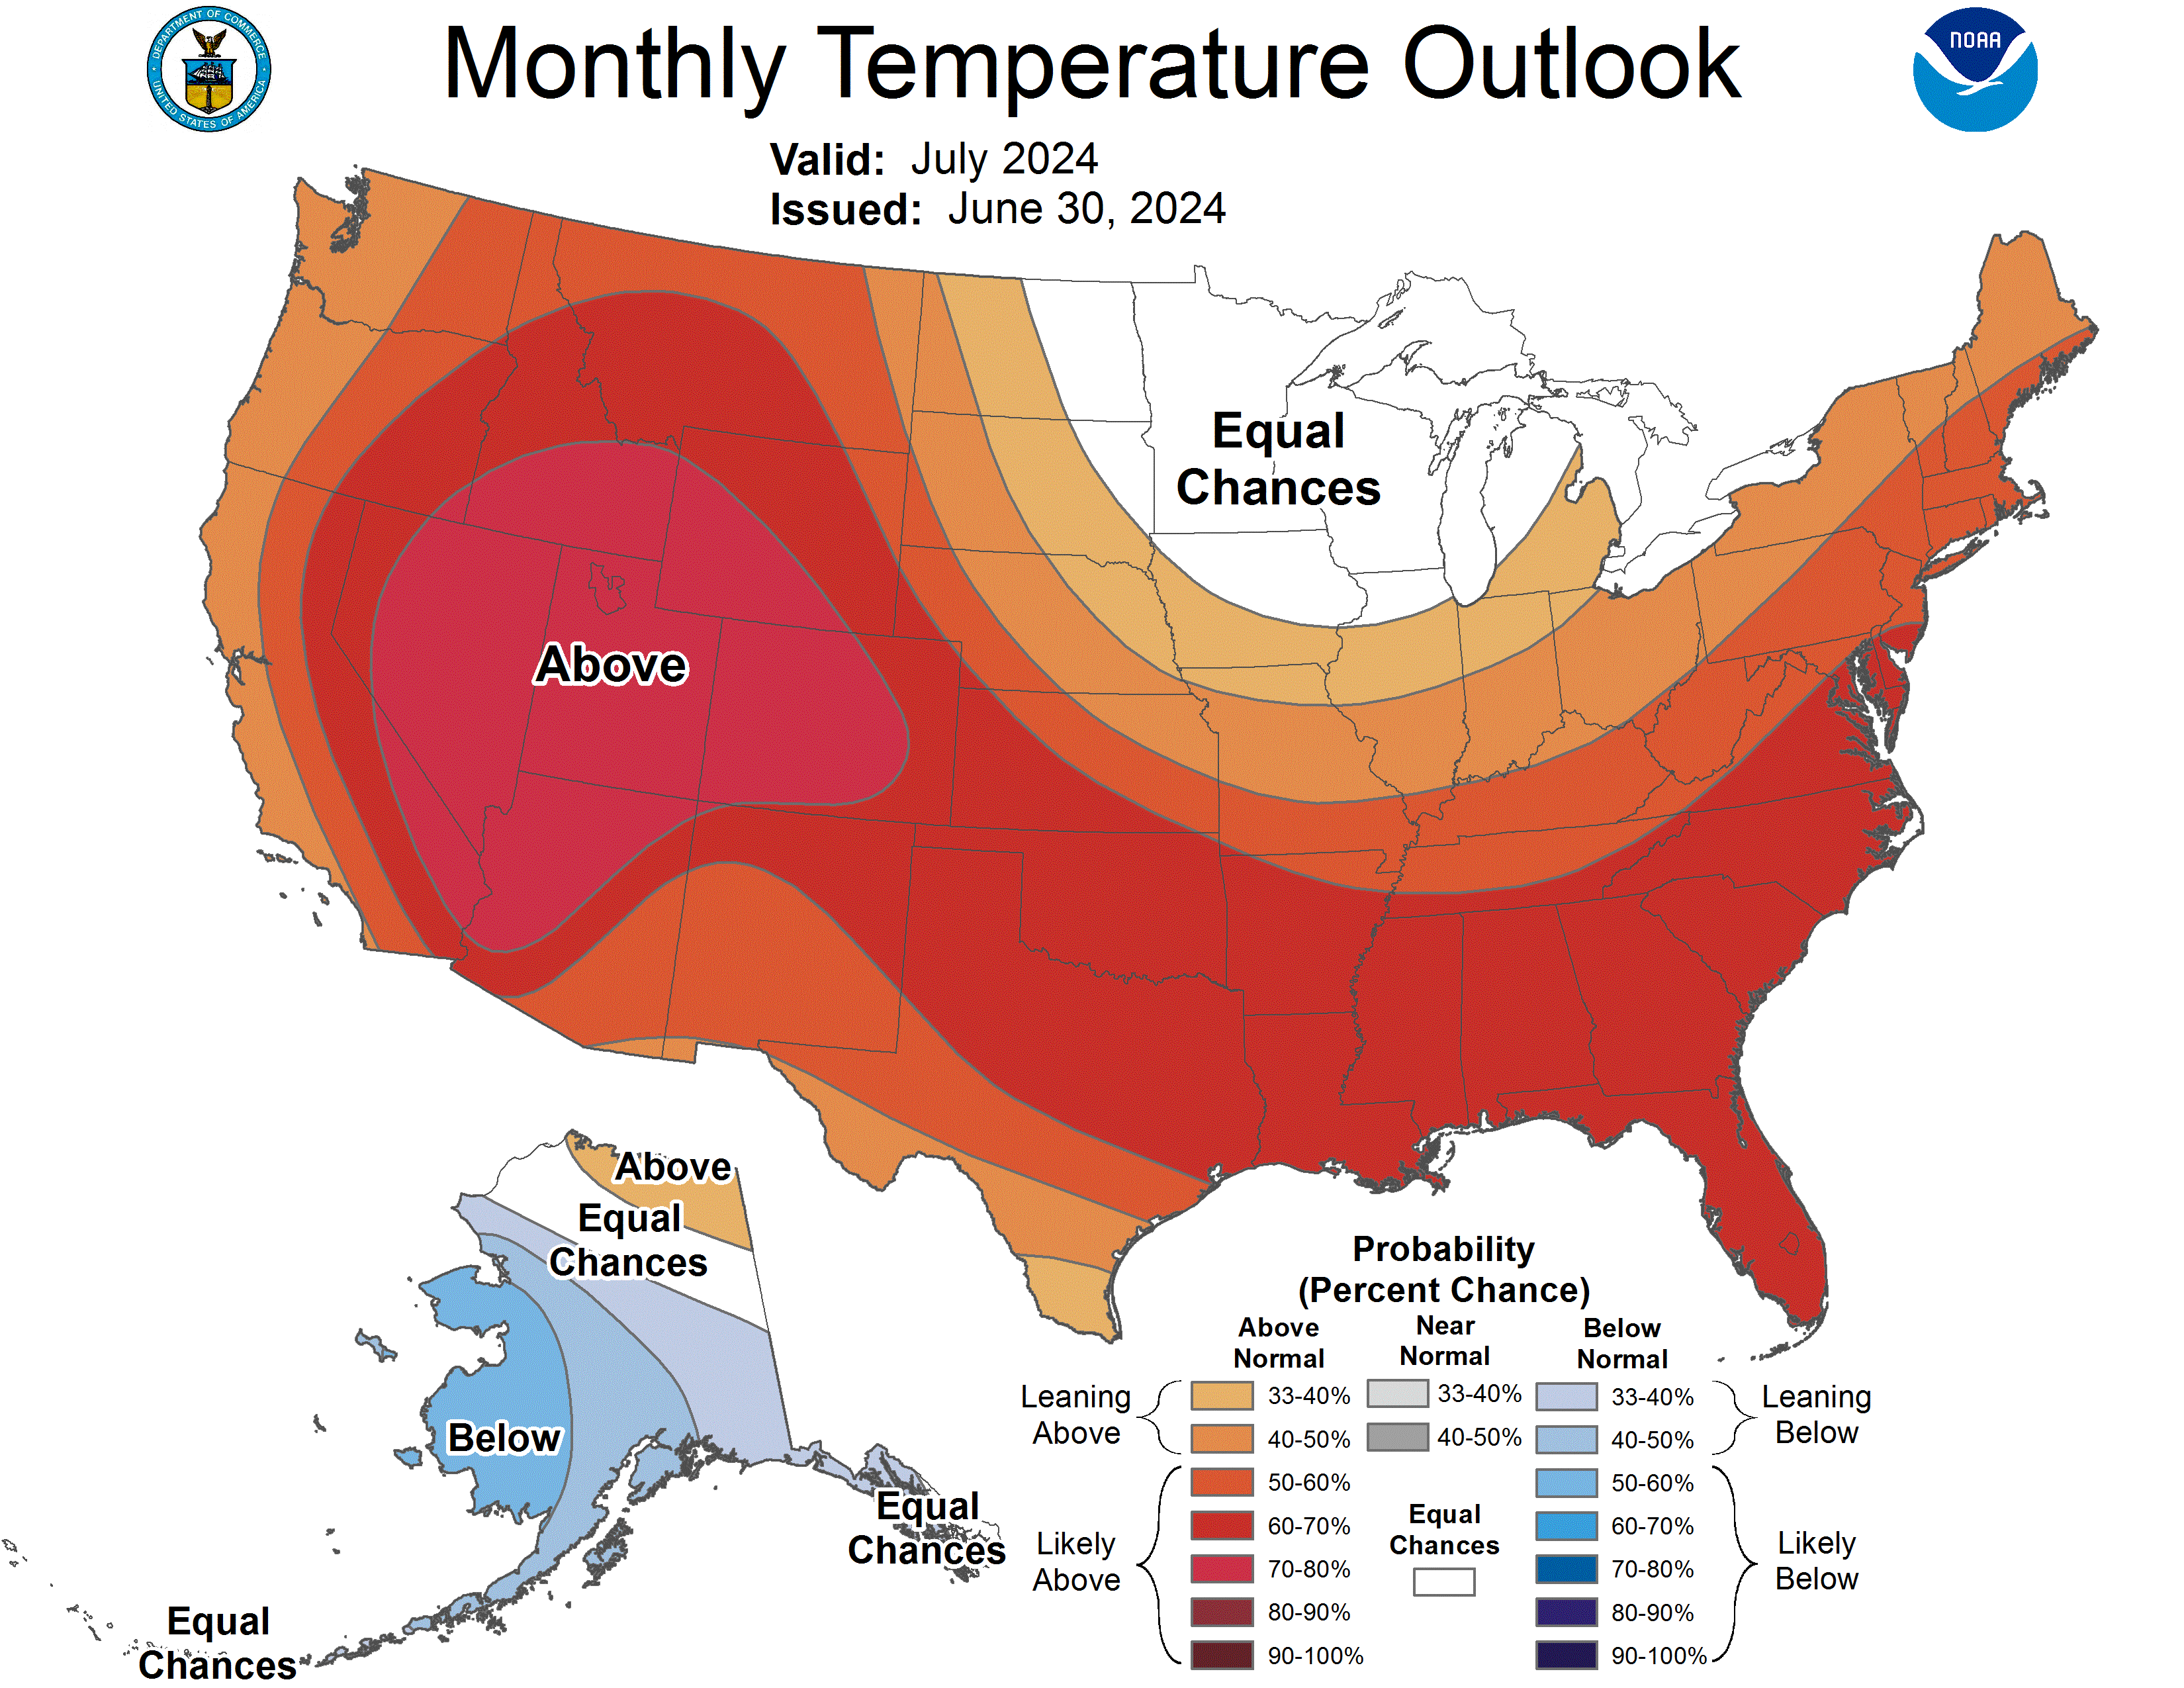 One Month Temperature Outlook